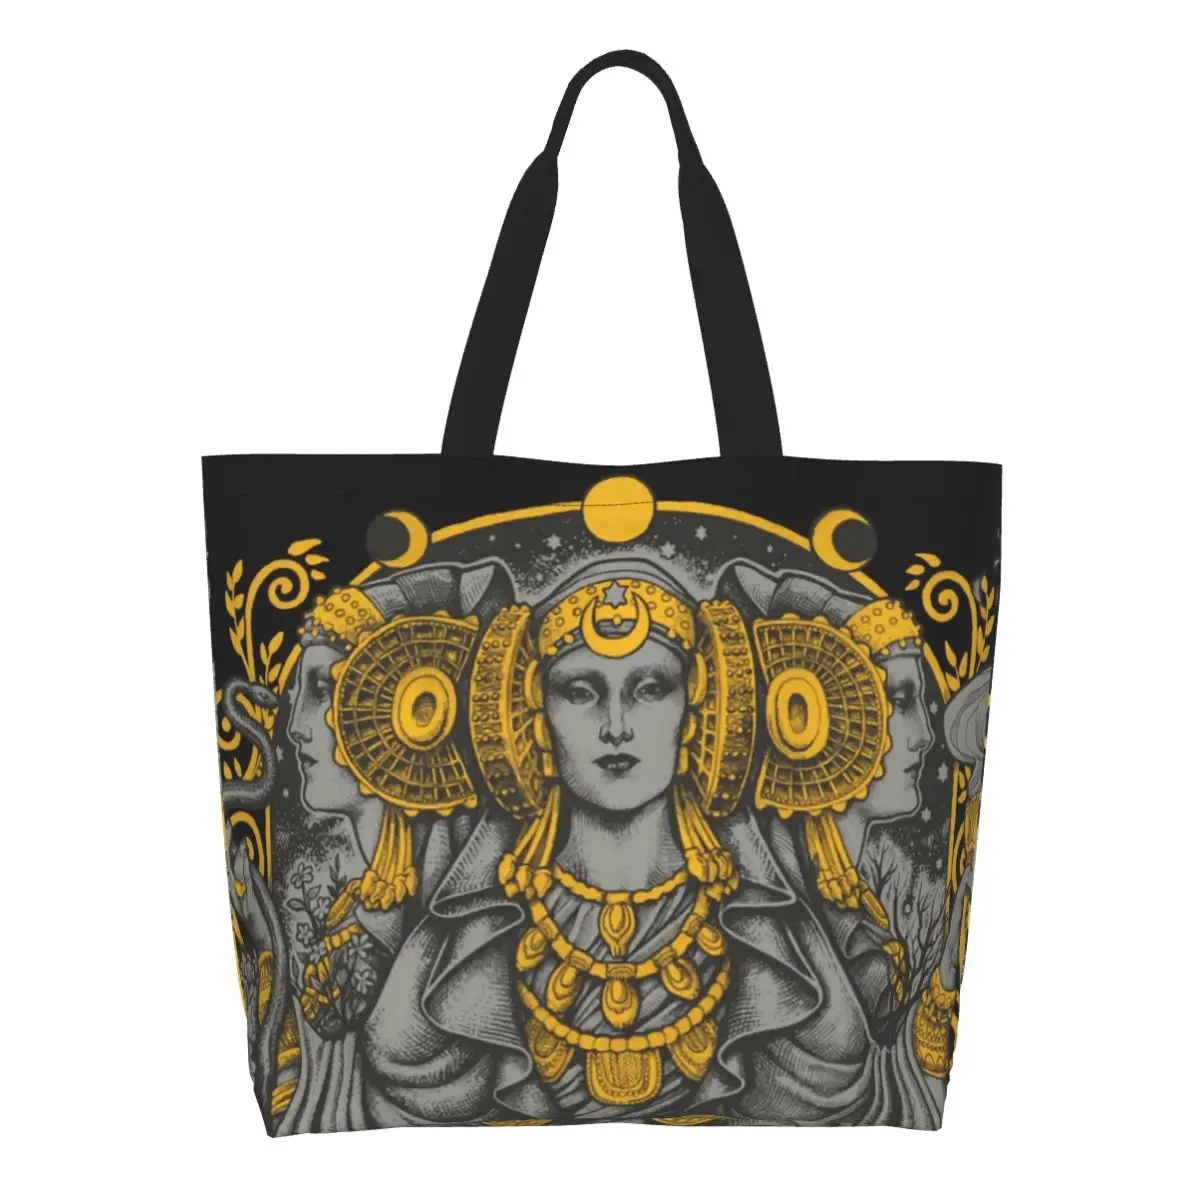 Iberian Hecate Gray Shopping Canvas Bags Women Recycling Large Capacity Grocery Dama de Elche Witch Goddess Tote Shopper Bags